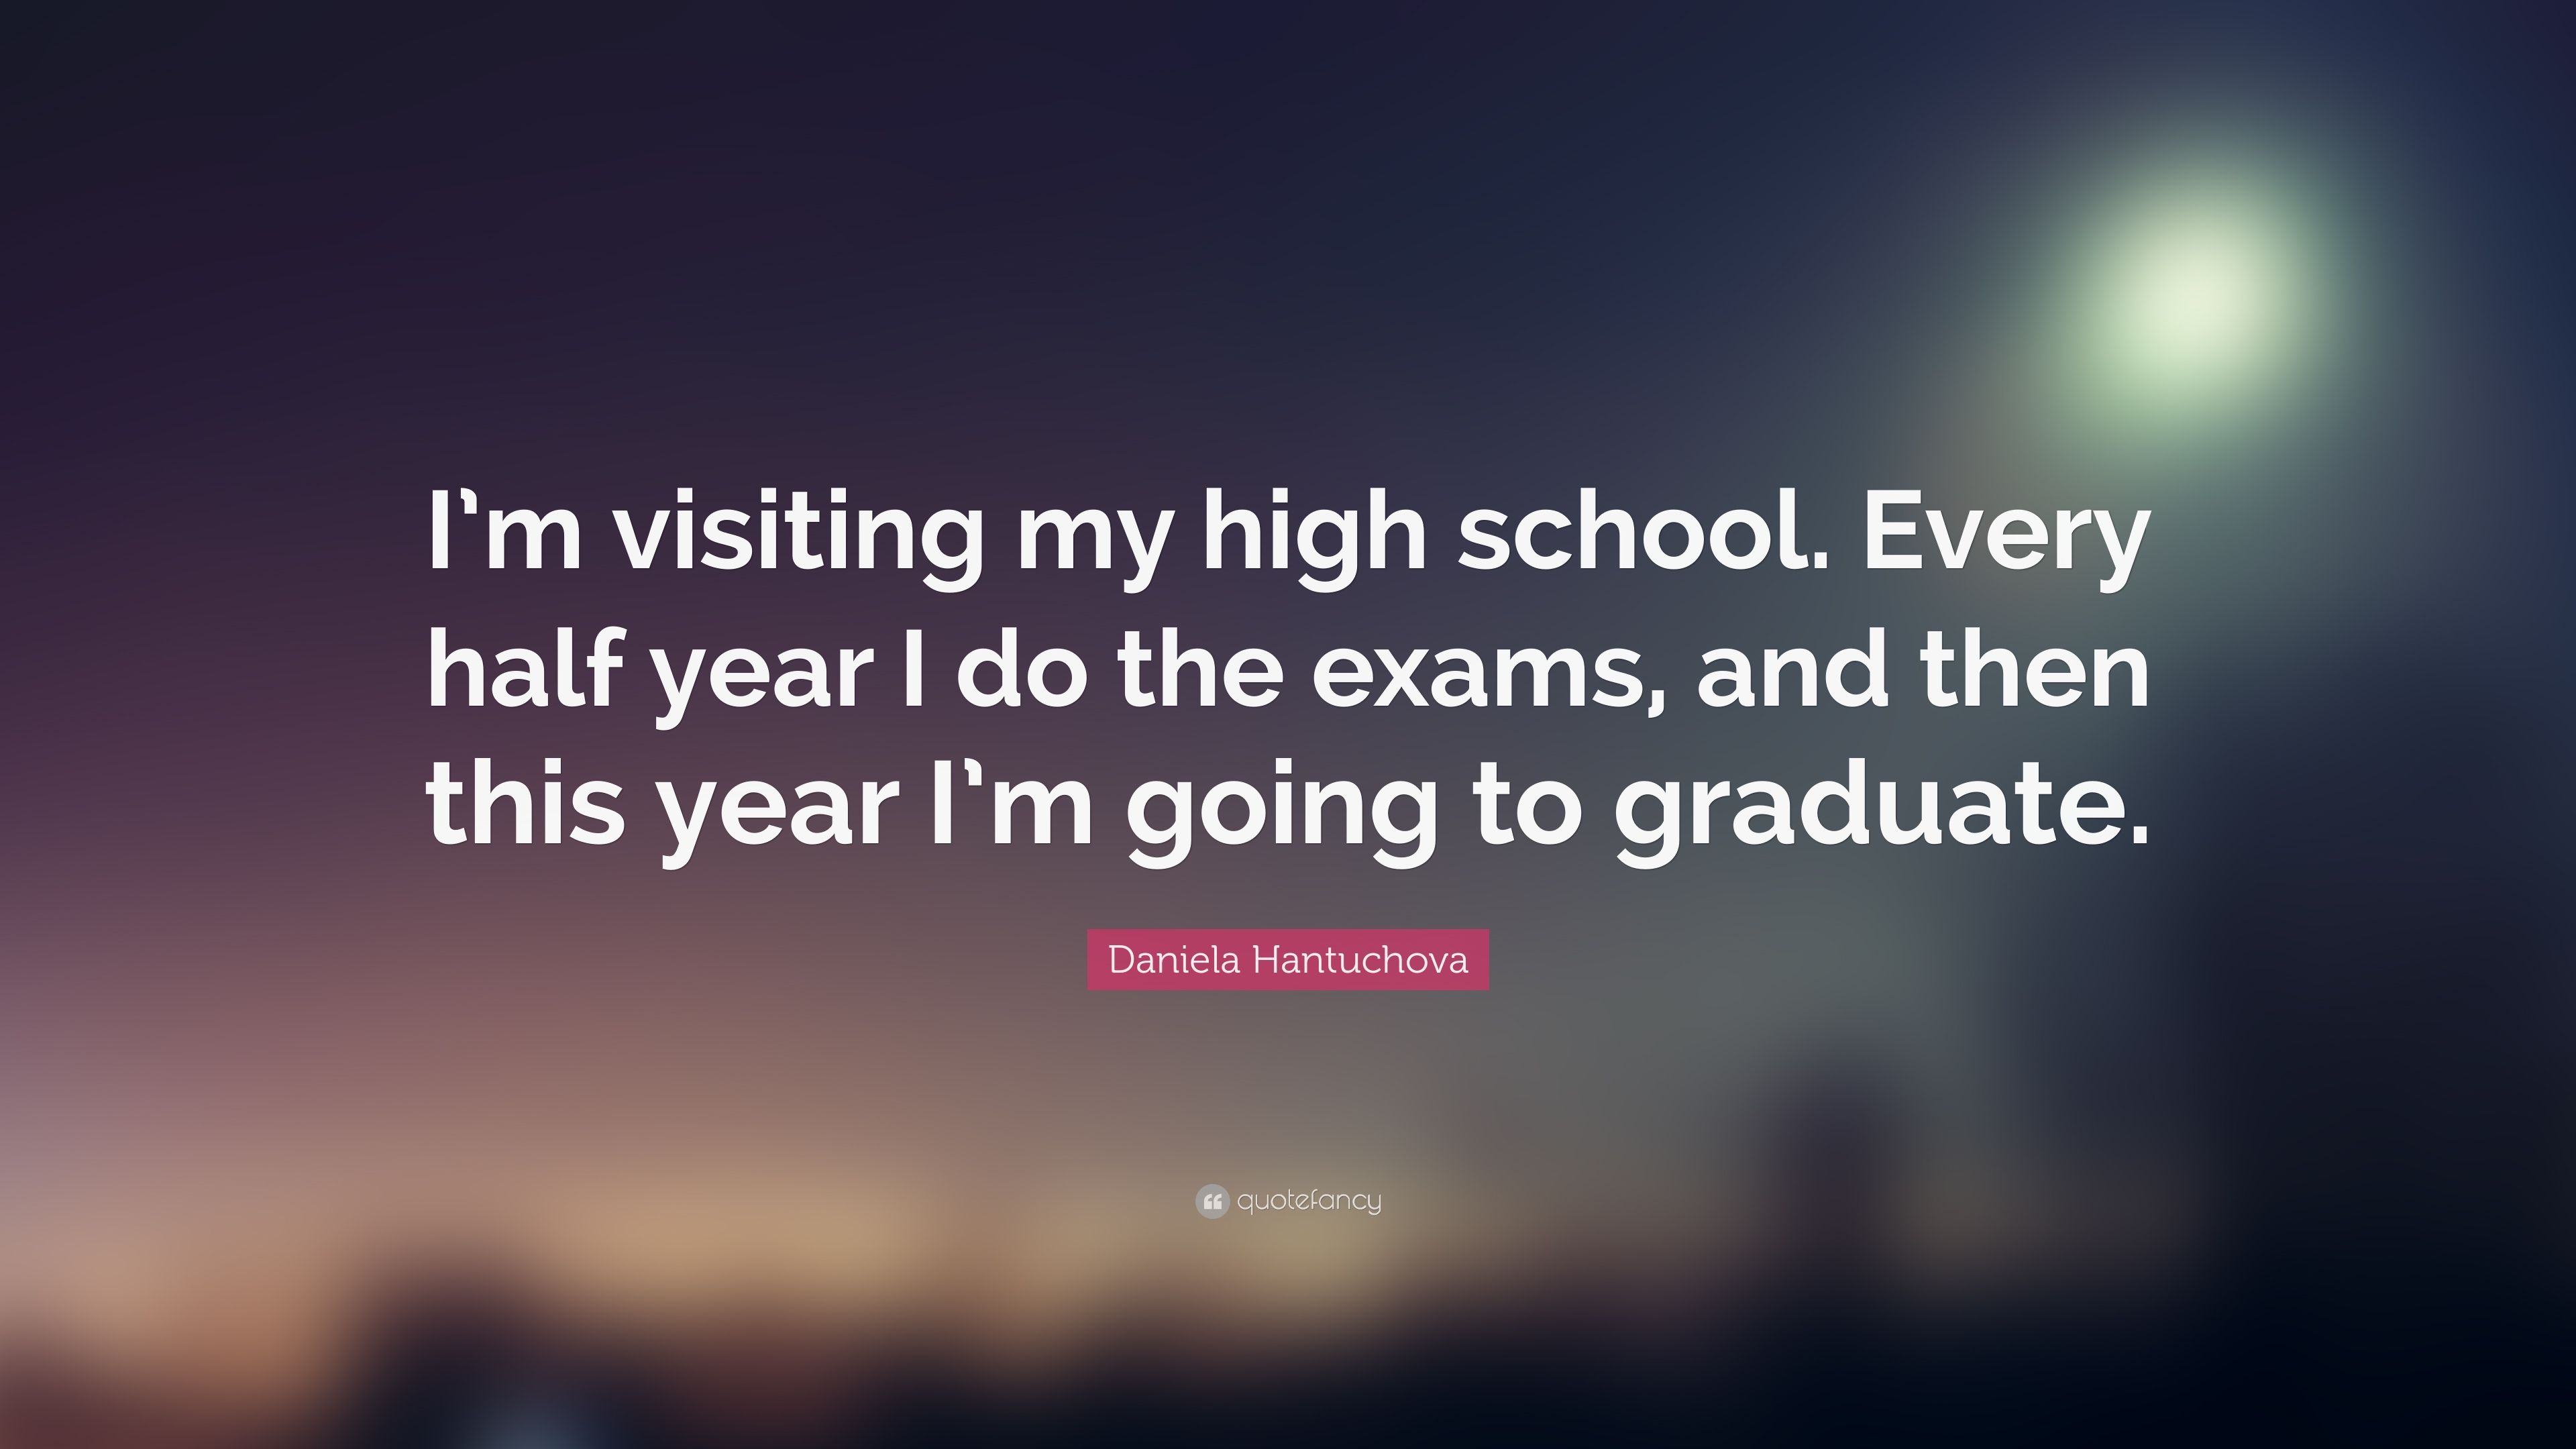 Daniela Hantuchova Quote: “I'm visiting my high school. Every half year I do the exams, and then this year I'm going to graduate.” (7 wallpaper)